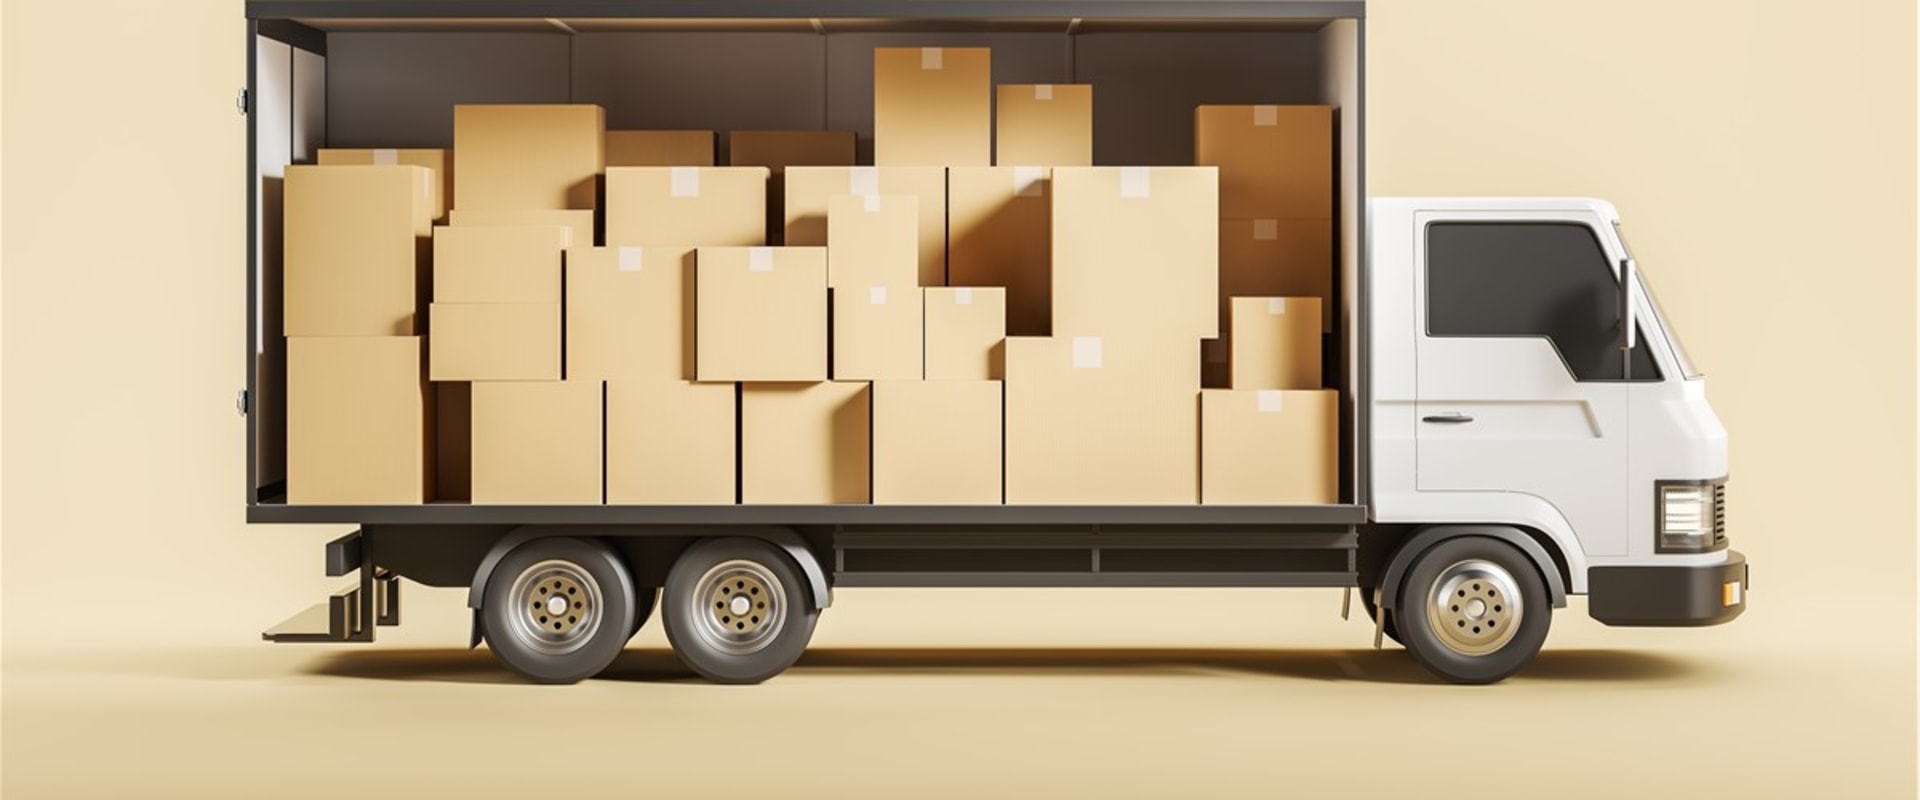 The Ins and Outs of Vehicle Transportation Services Provided by Moving Companies